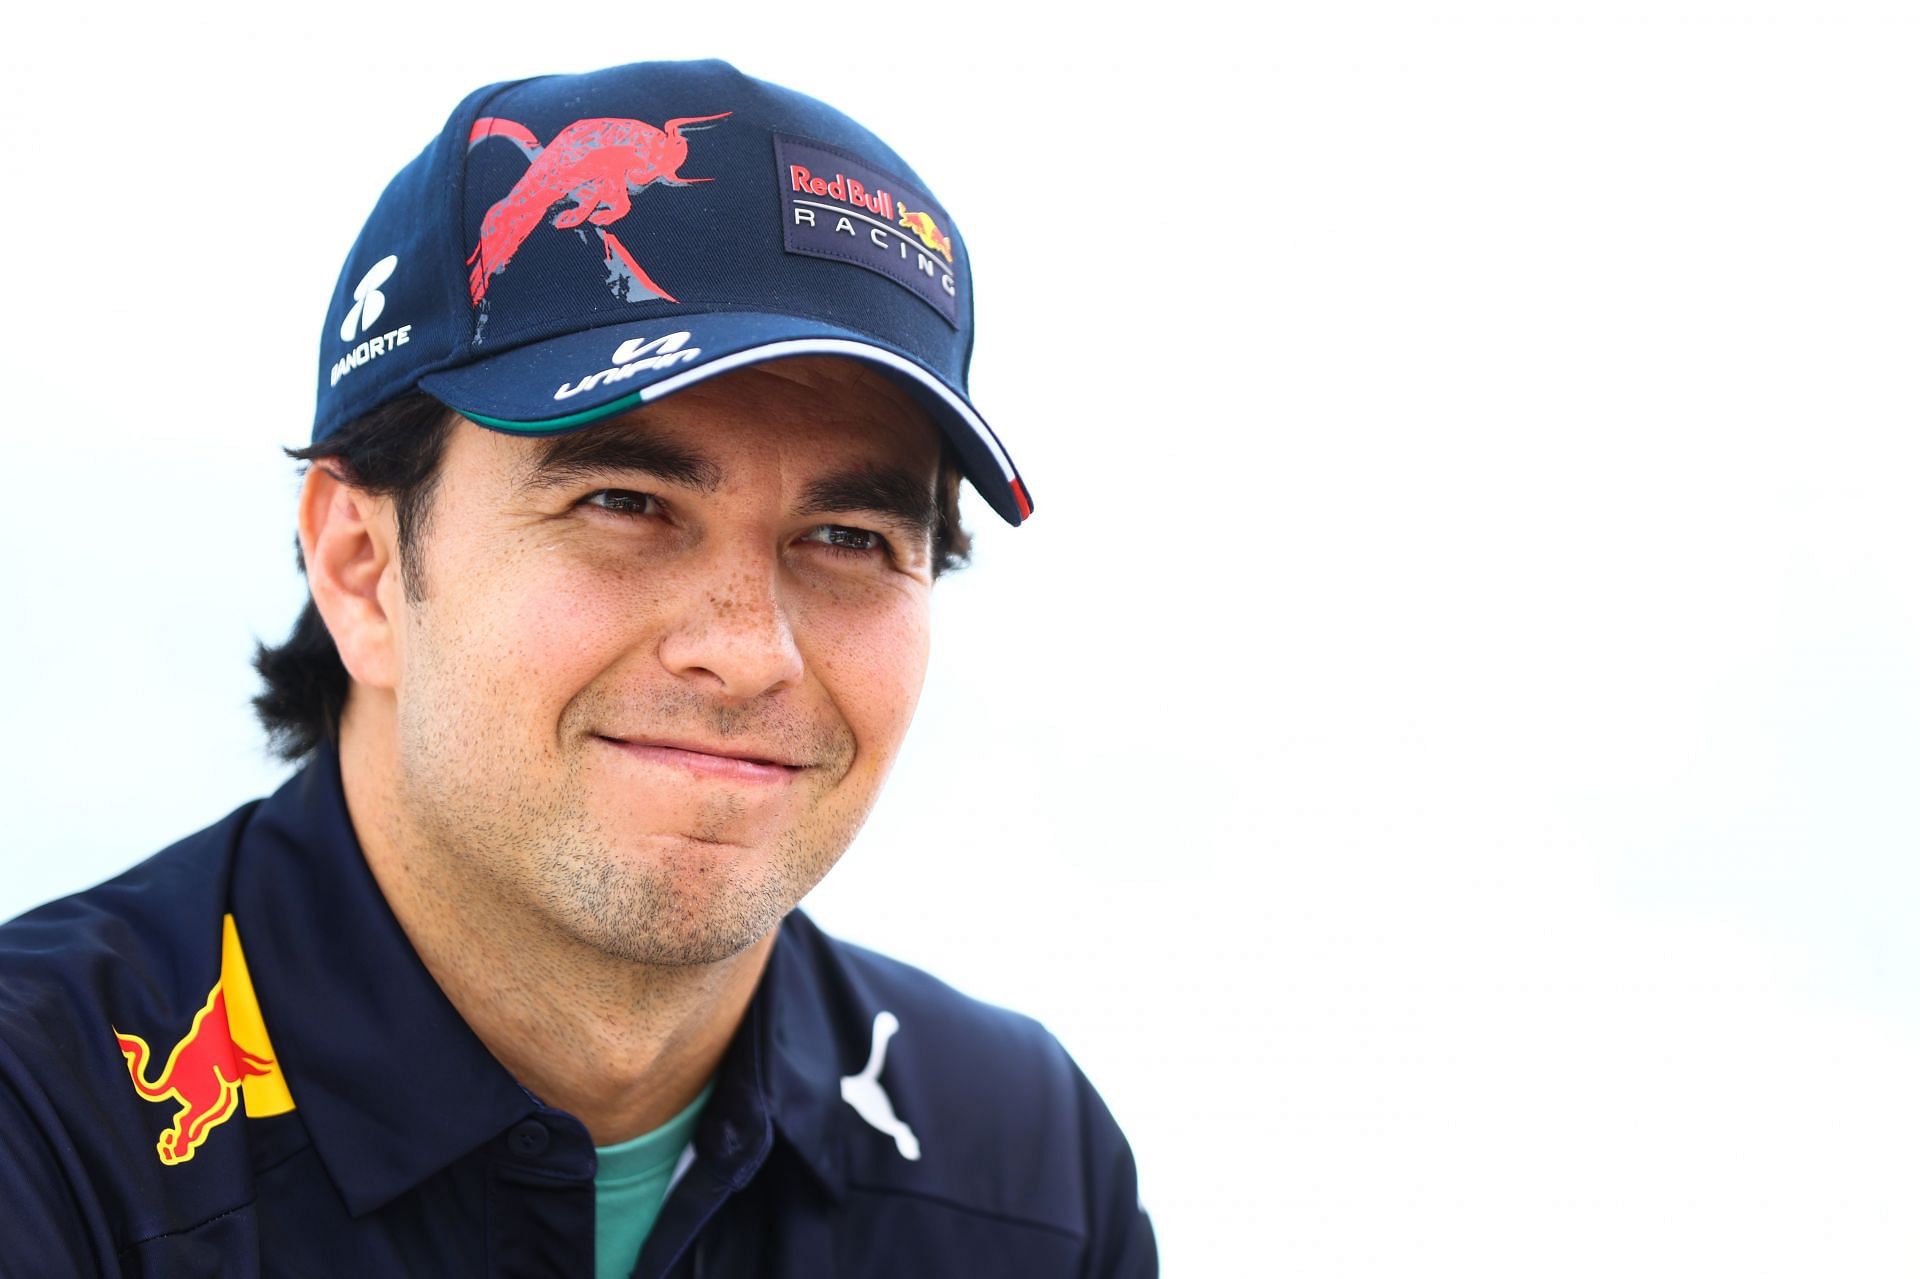 Red Bull driver Sergio Perez in the paddock before FP1 for the 2022 F1 Monaco GP (Photo by Mark Thompson/Getty Images)